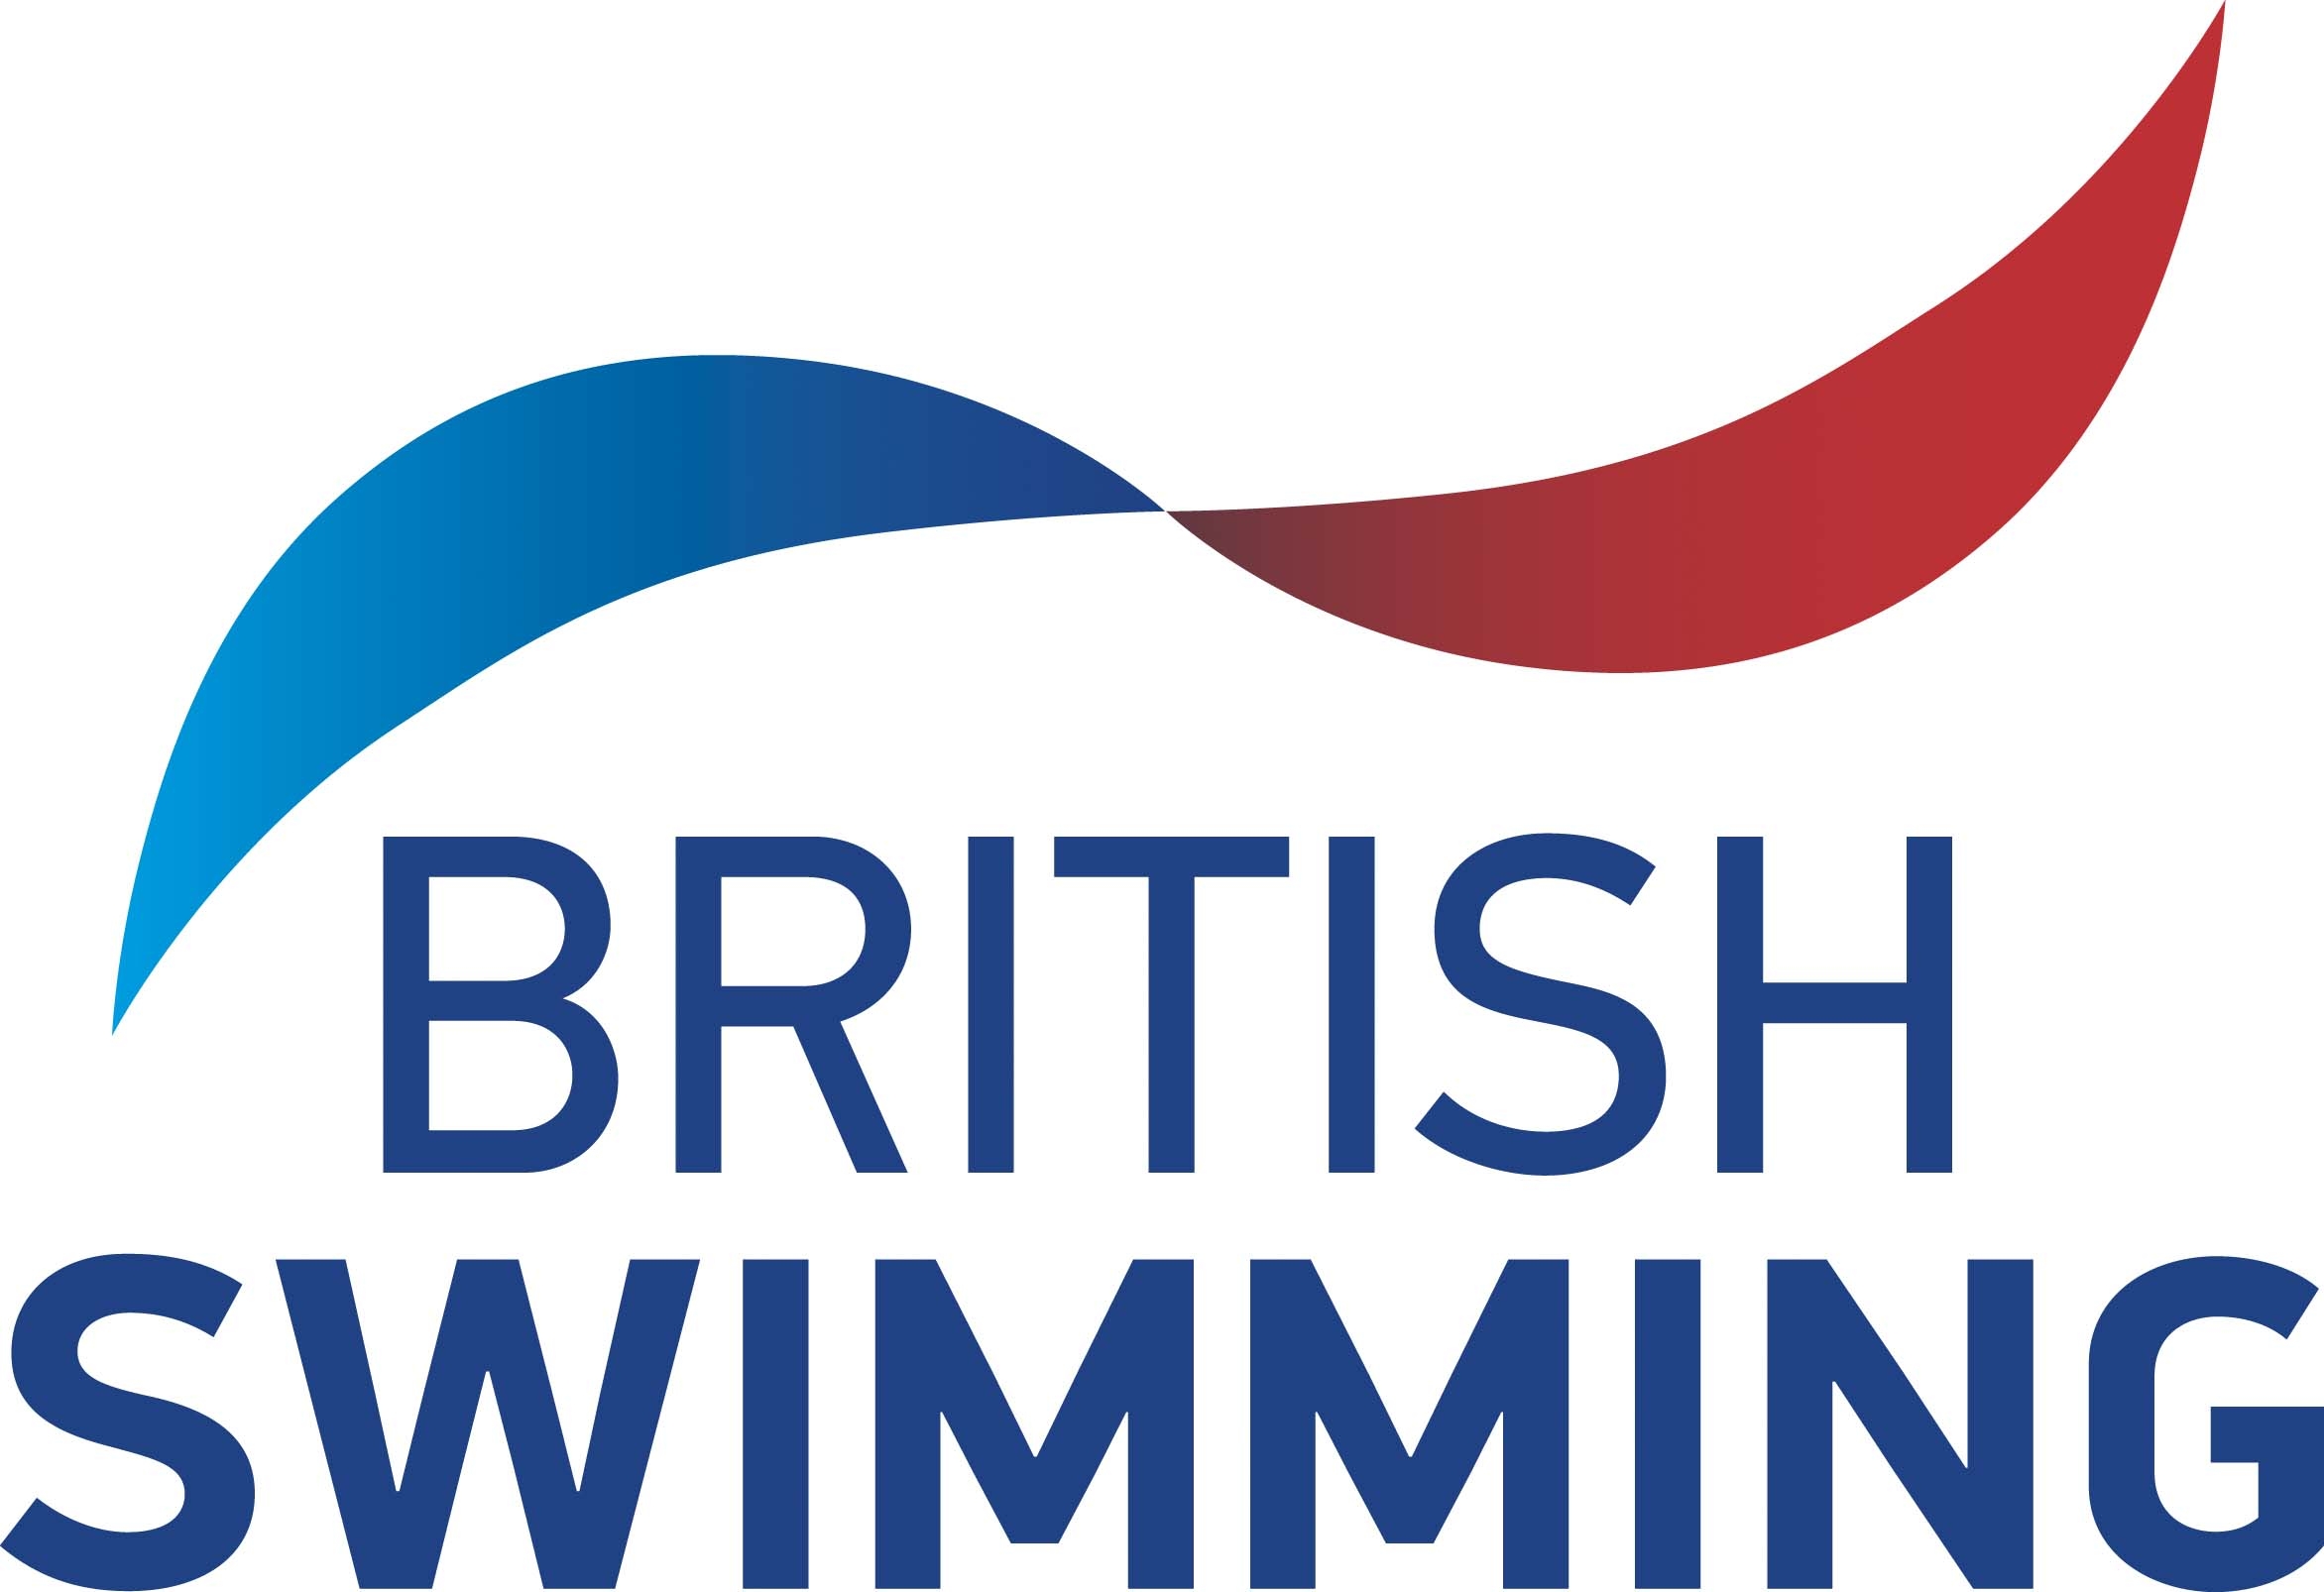 British Swimming have announced the changes in order to raise performance levels before Rio 2016 ©British Swimming